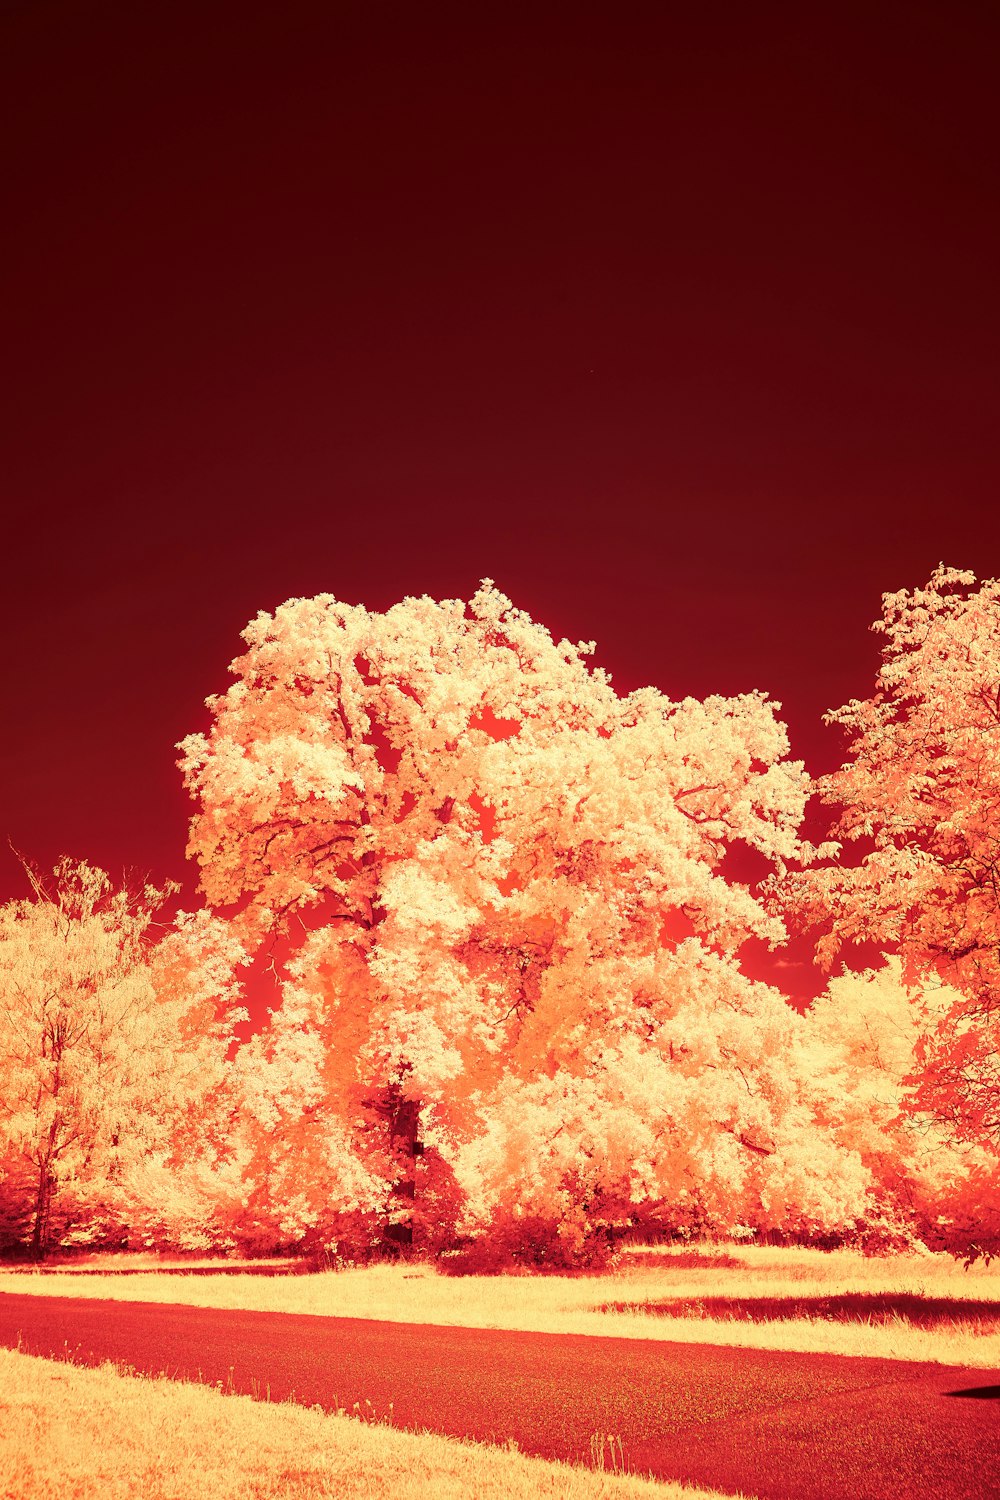 an infrared image of a tree in the middle of a field